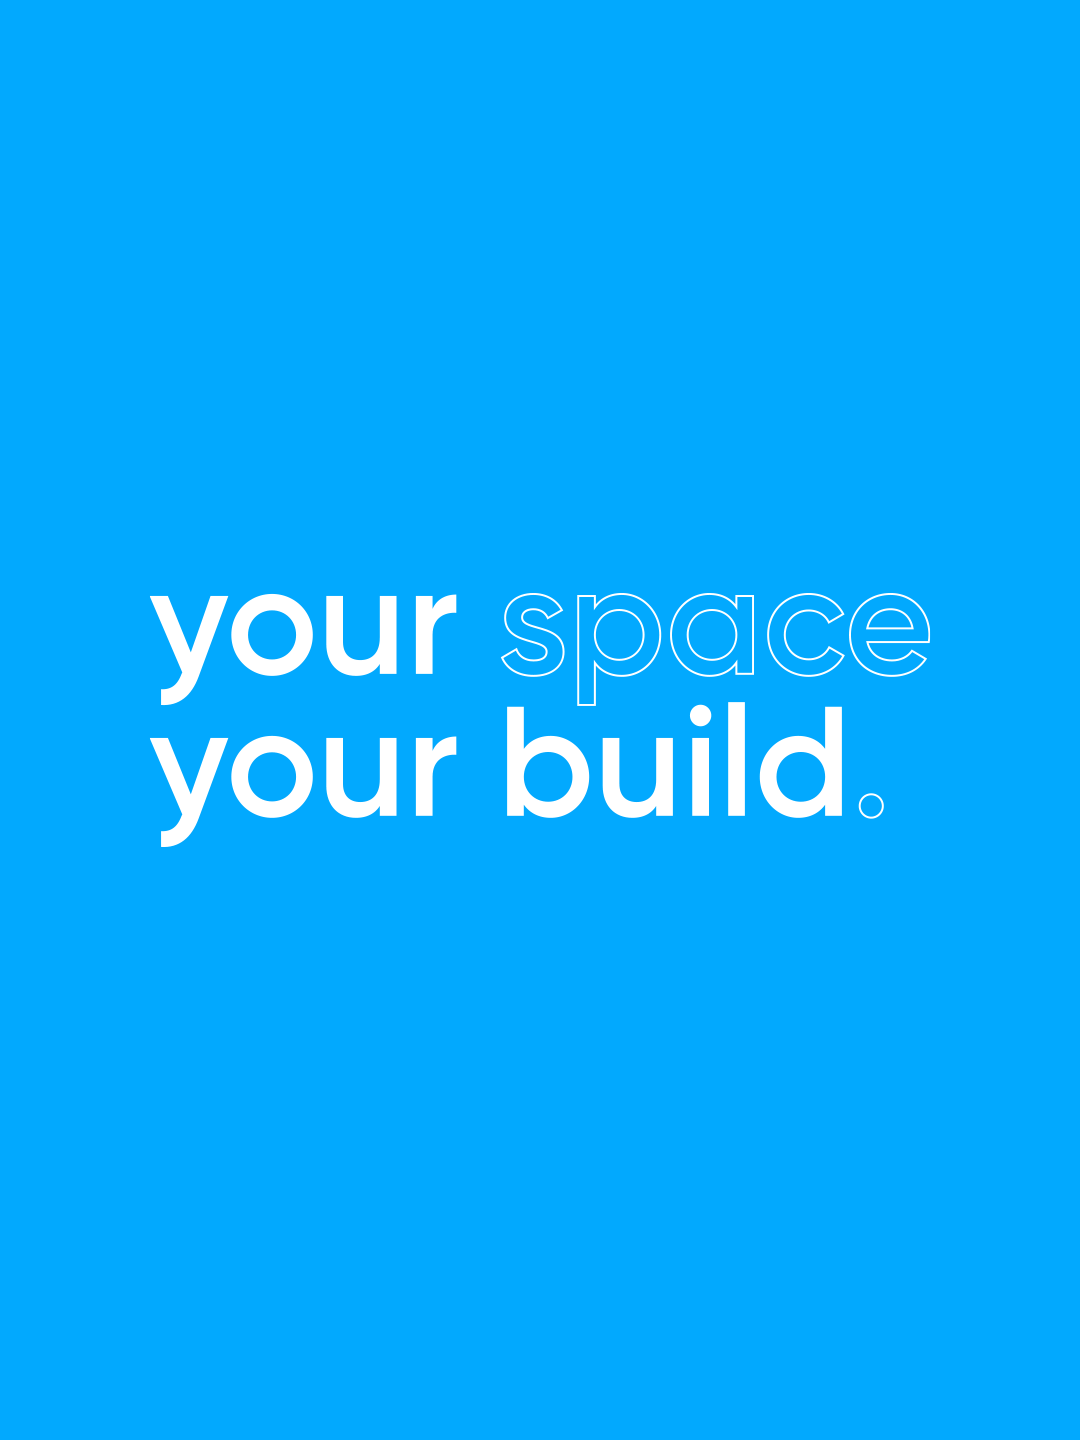 Citi System's "your space, your build" tagline over a solid blue background.